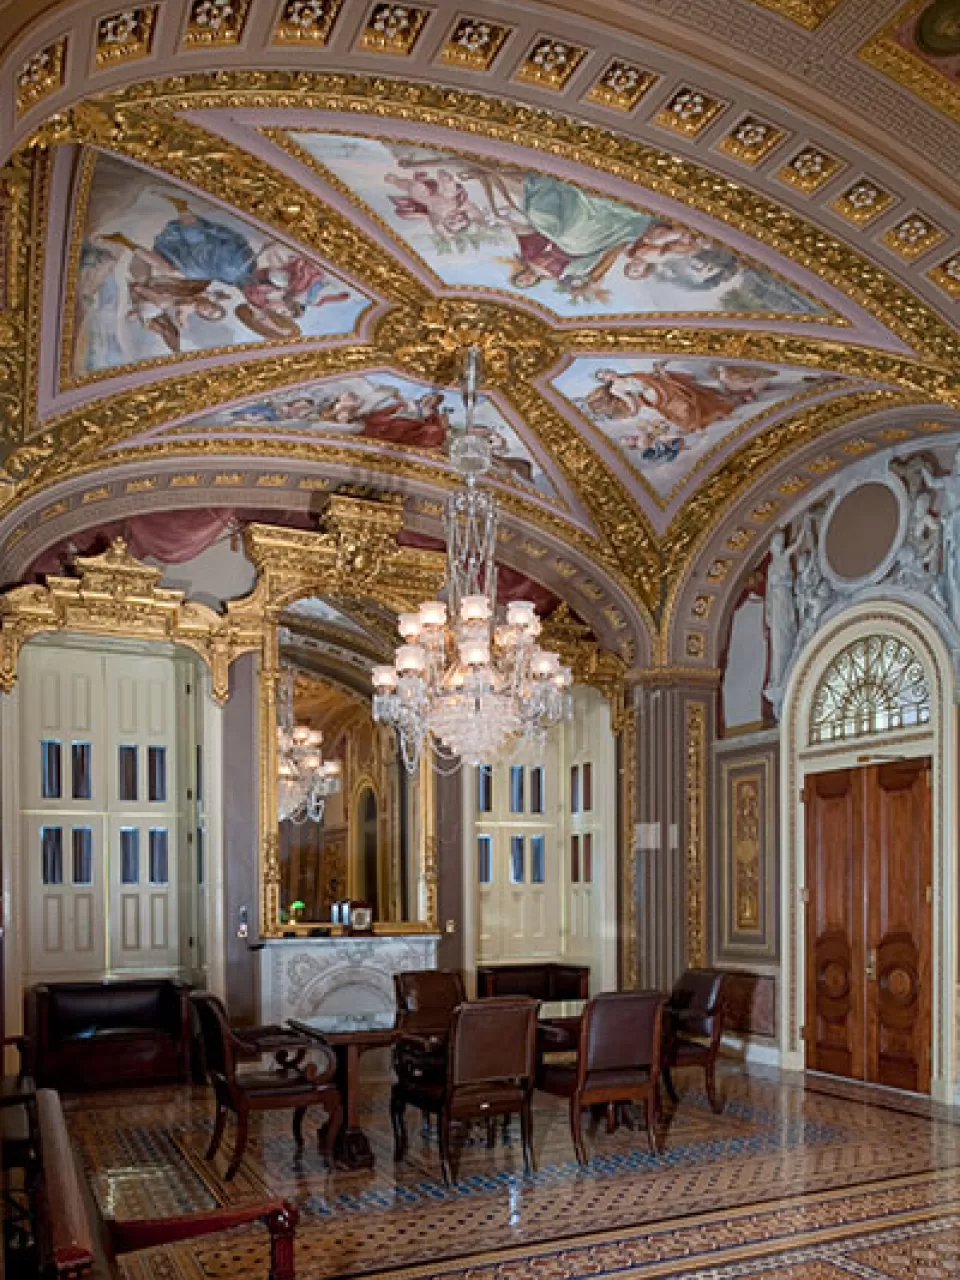 Room S-213 of the U.S. Capitol serves as the Senate Reception Room.